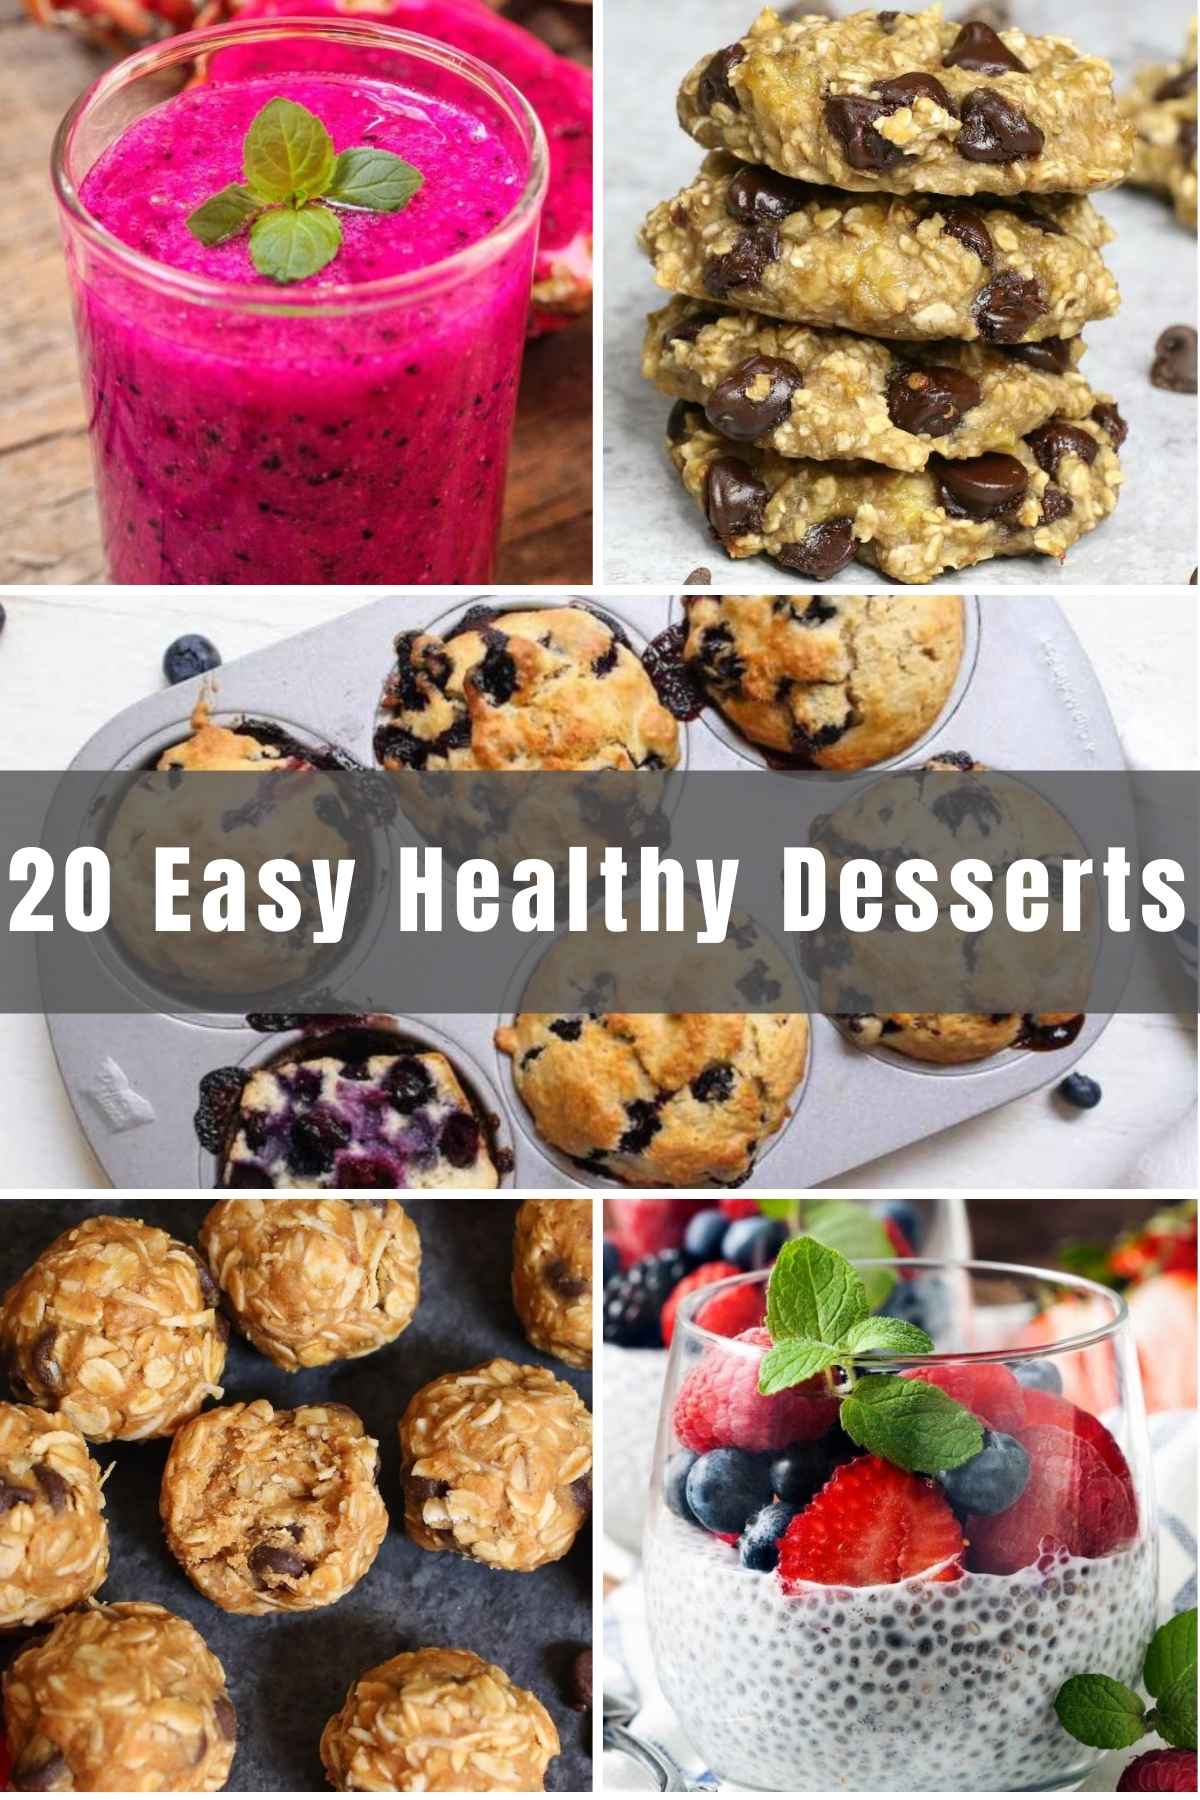 From fruit-filled muffins, to creamy parfaits, and low carb chia pudding, we’re sure you’ll find some favorites in this collection of 20 Easy Healthy Desserts.